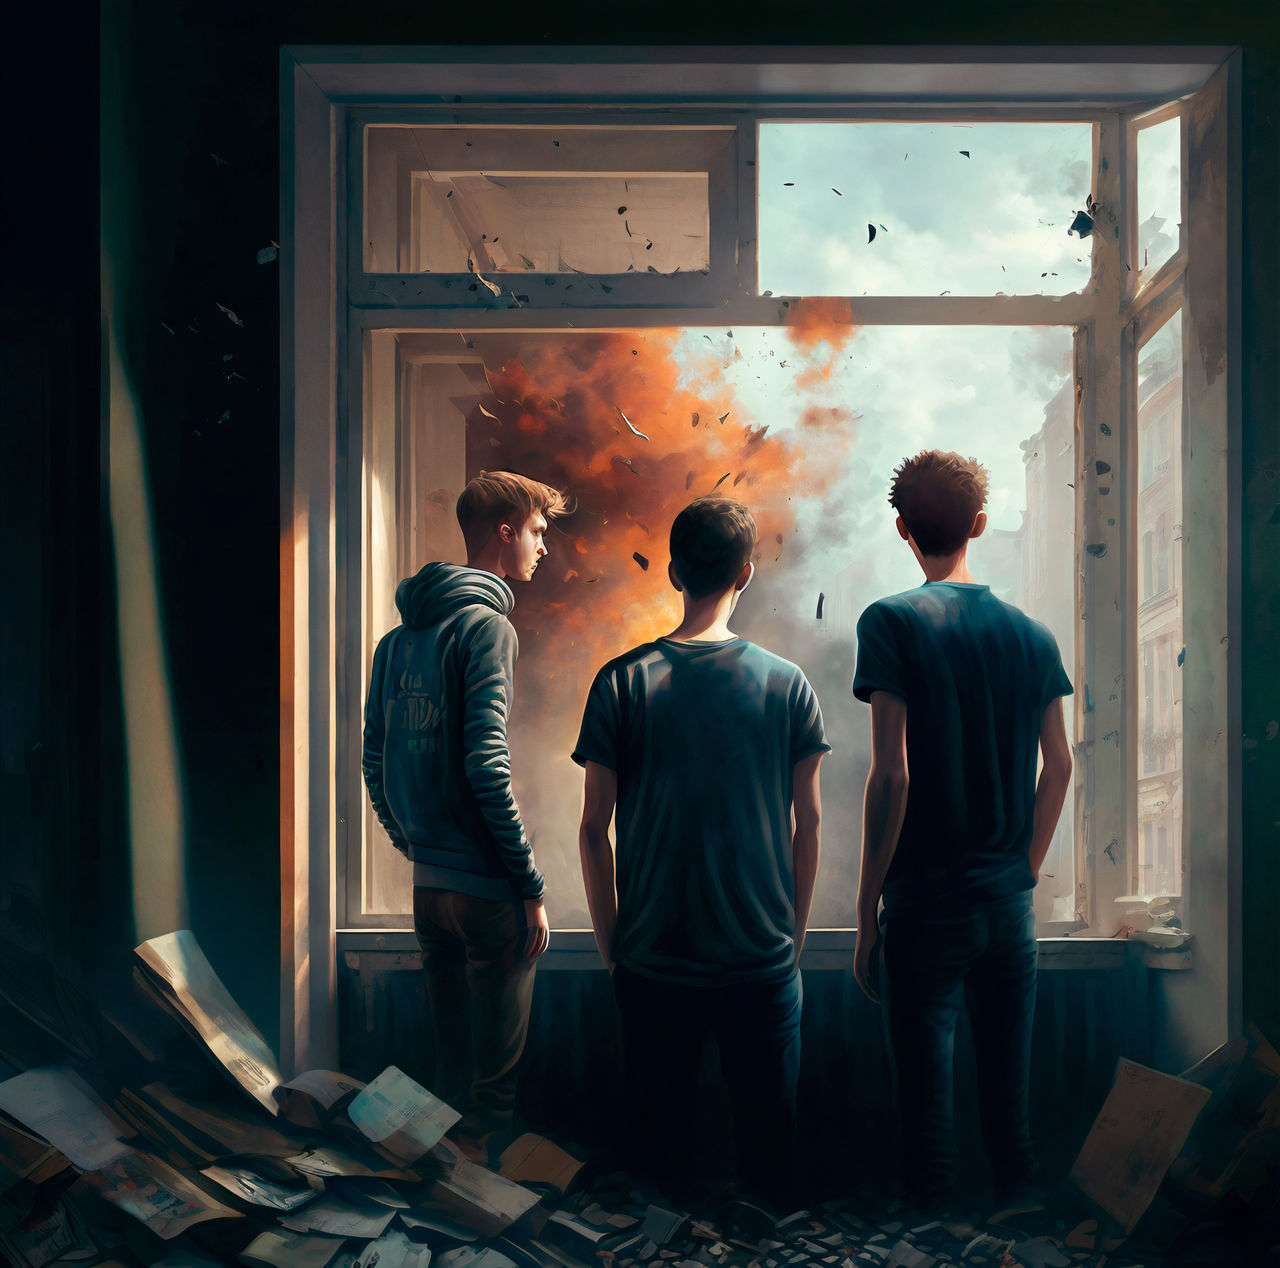 group of people, adult, men, indoors, rear view, standing, architecture, communication, togetherness, young adult, art, window, screenshot, small group of people, darkness